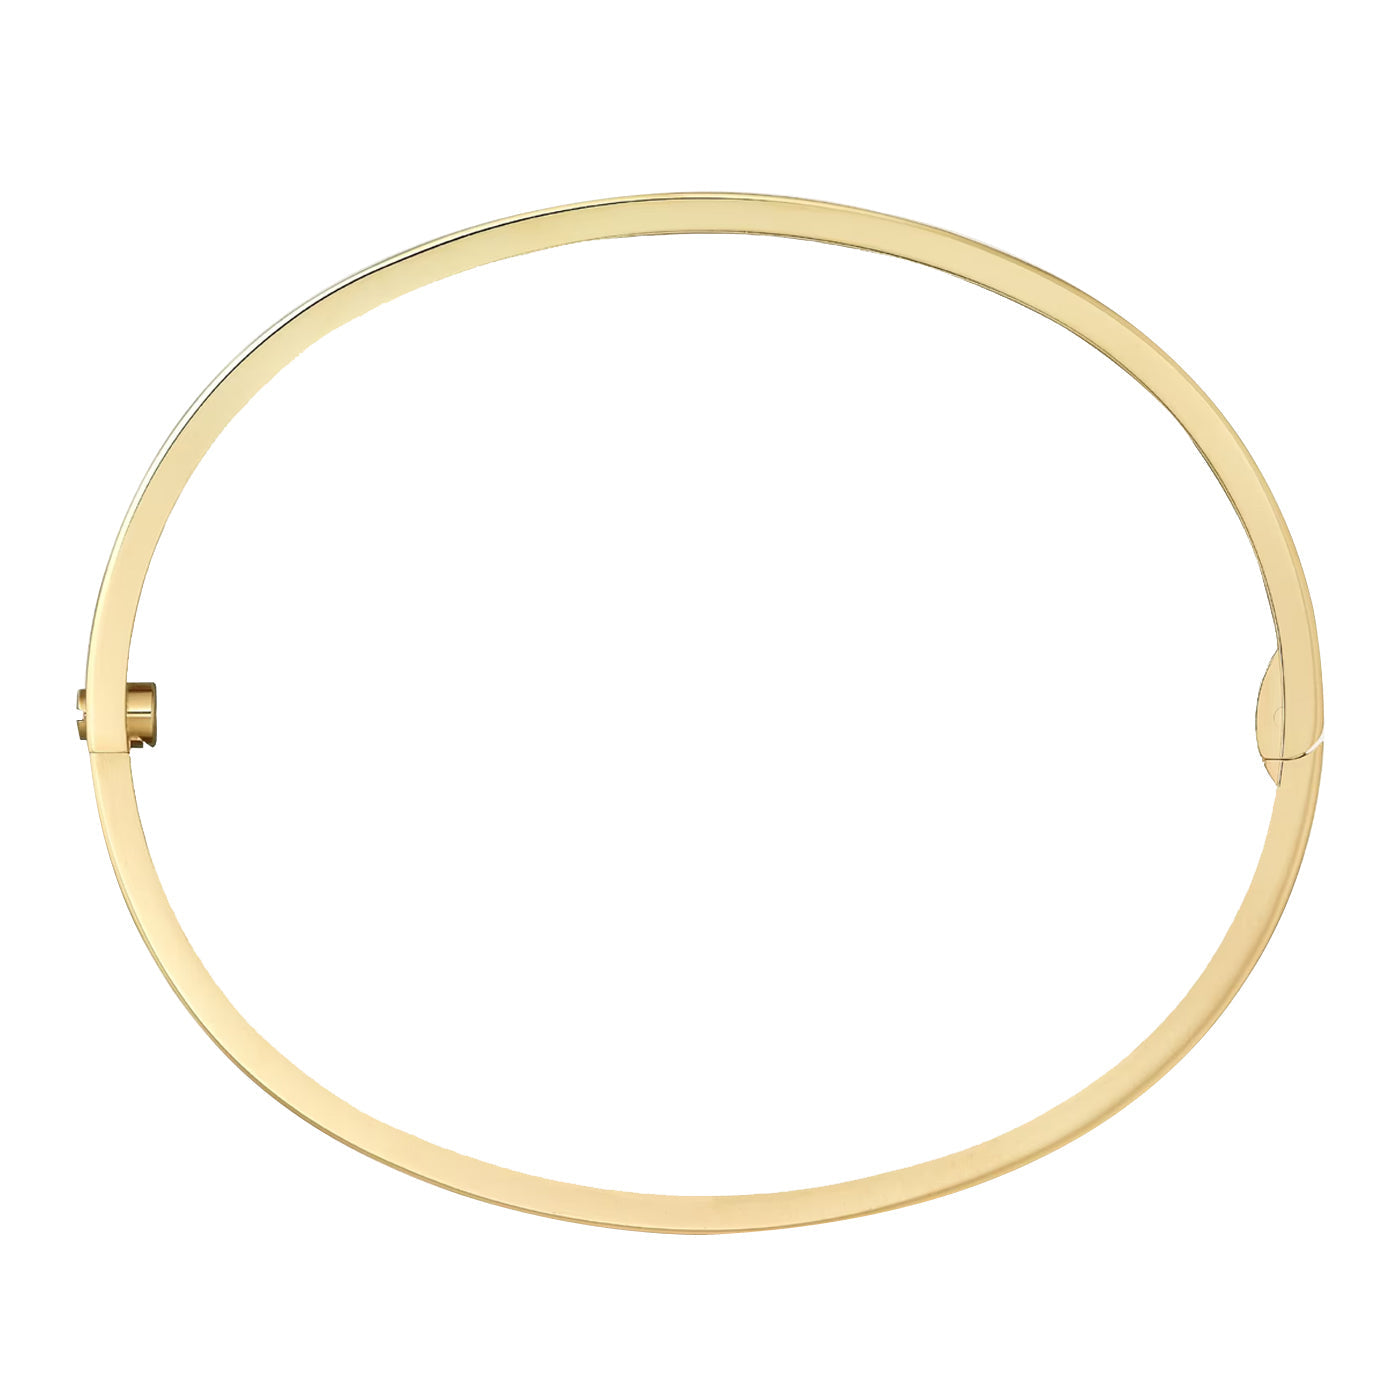 Cartier Love Bracelet 18K Yellow Gold Size 15 Small Model With a Screwdriver